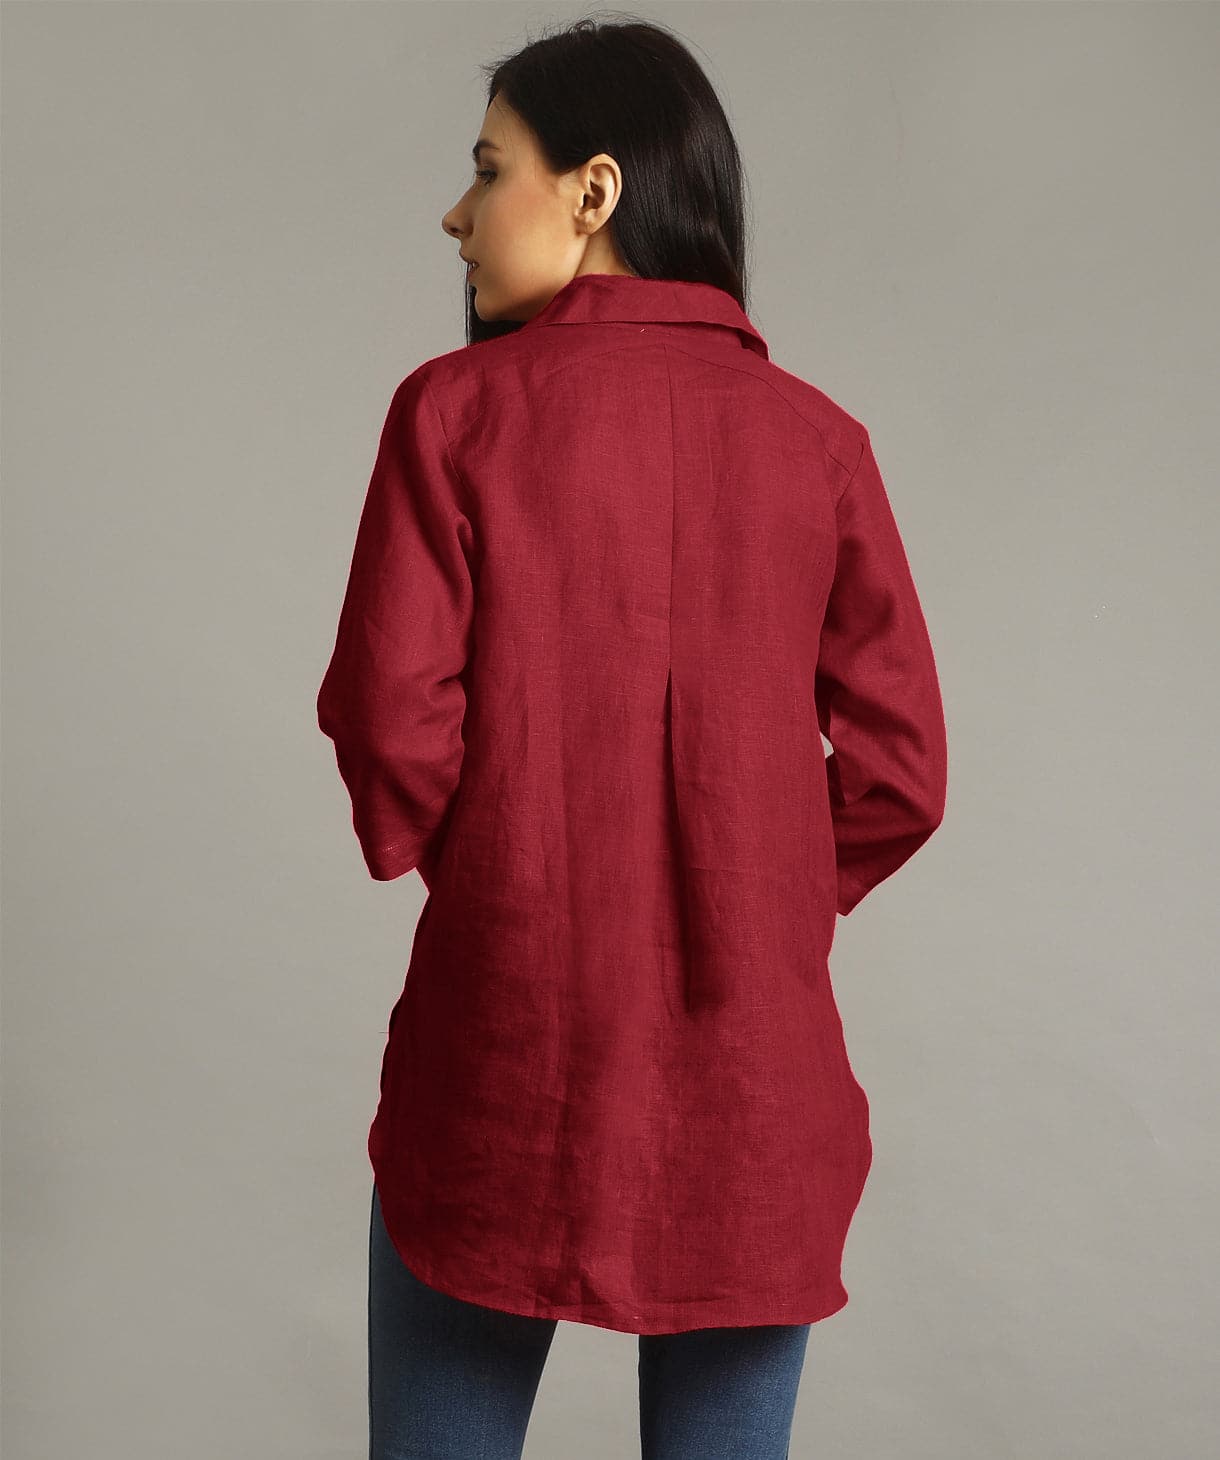 Plus Maroon High-Low Linen Tunic - Uptownie